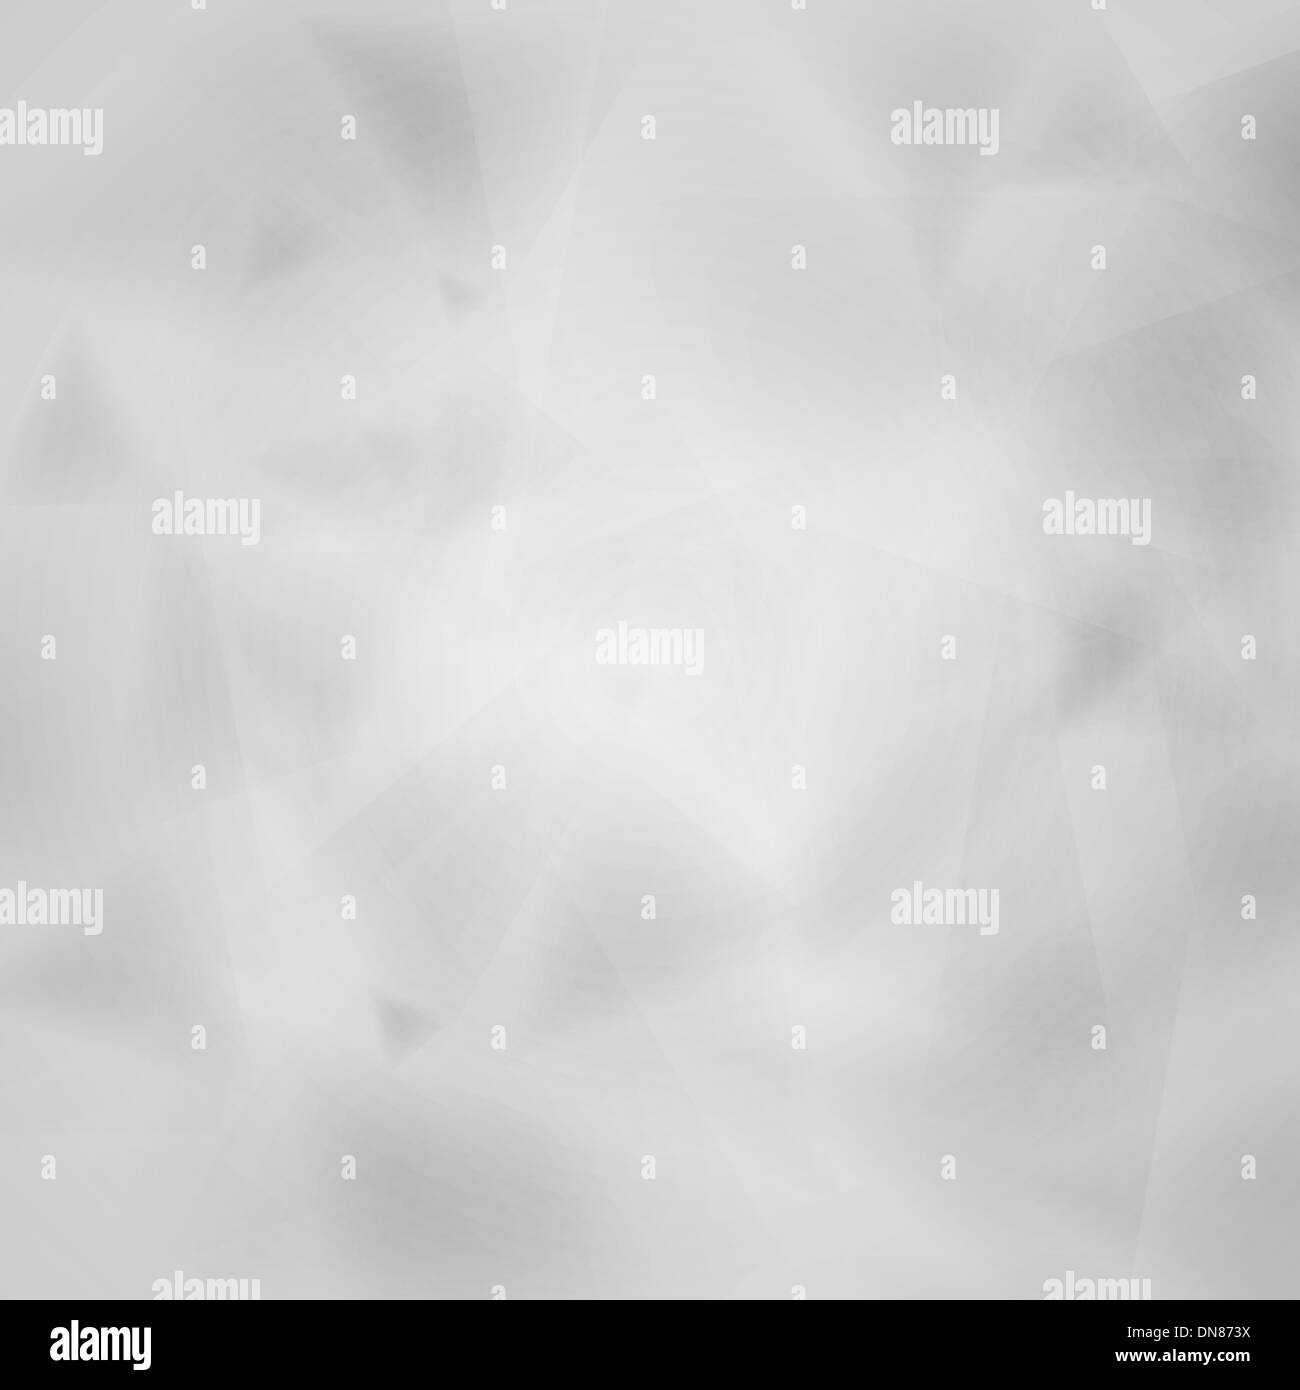 Abstract light Black and White Stock Photos & Images - Alamy